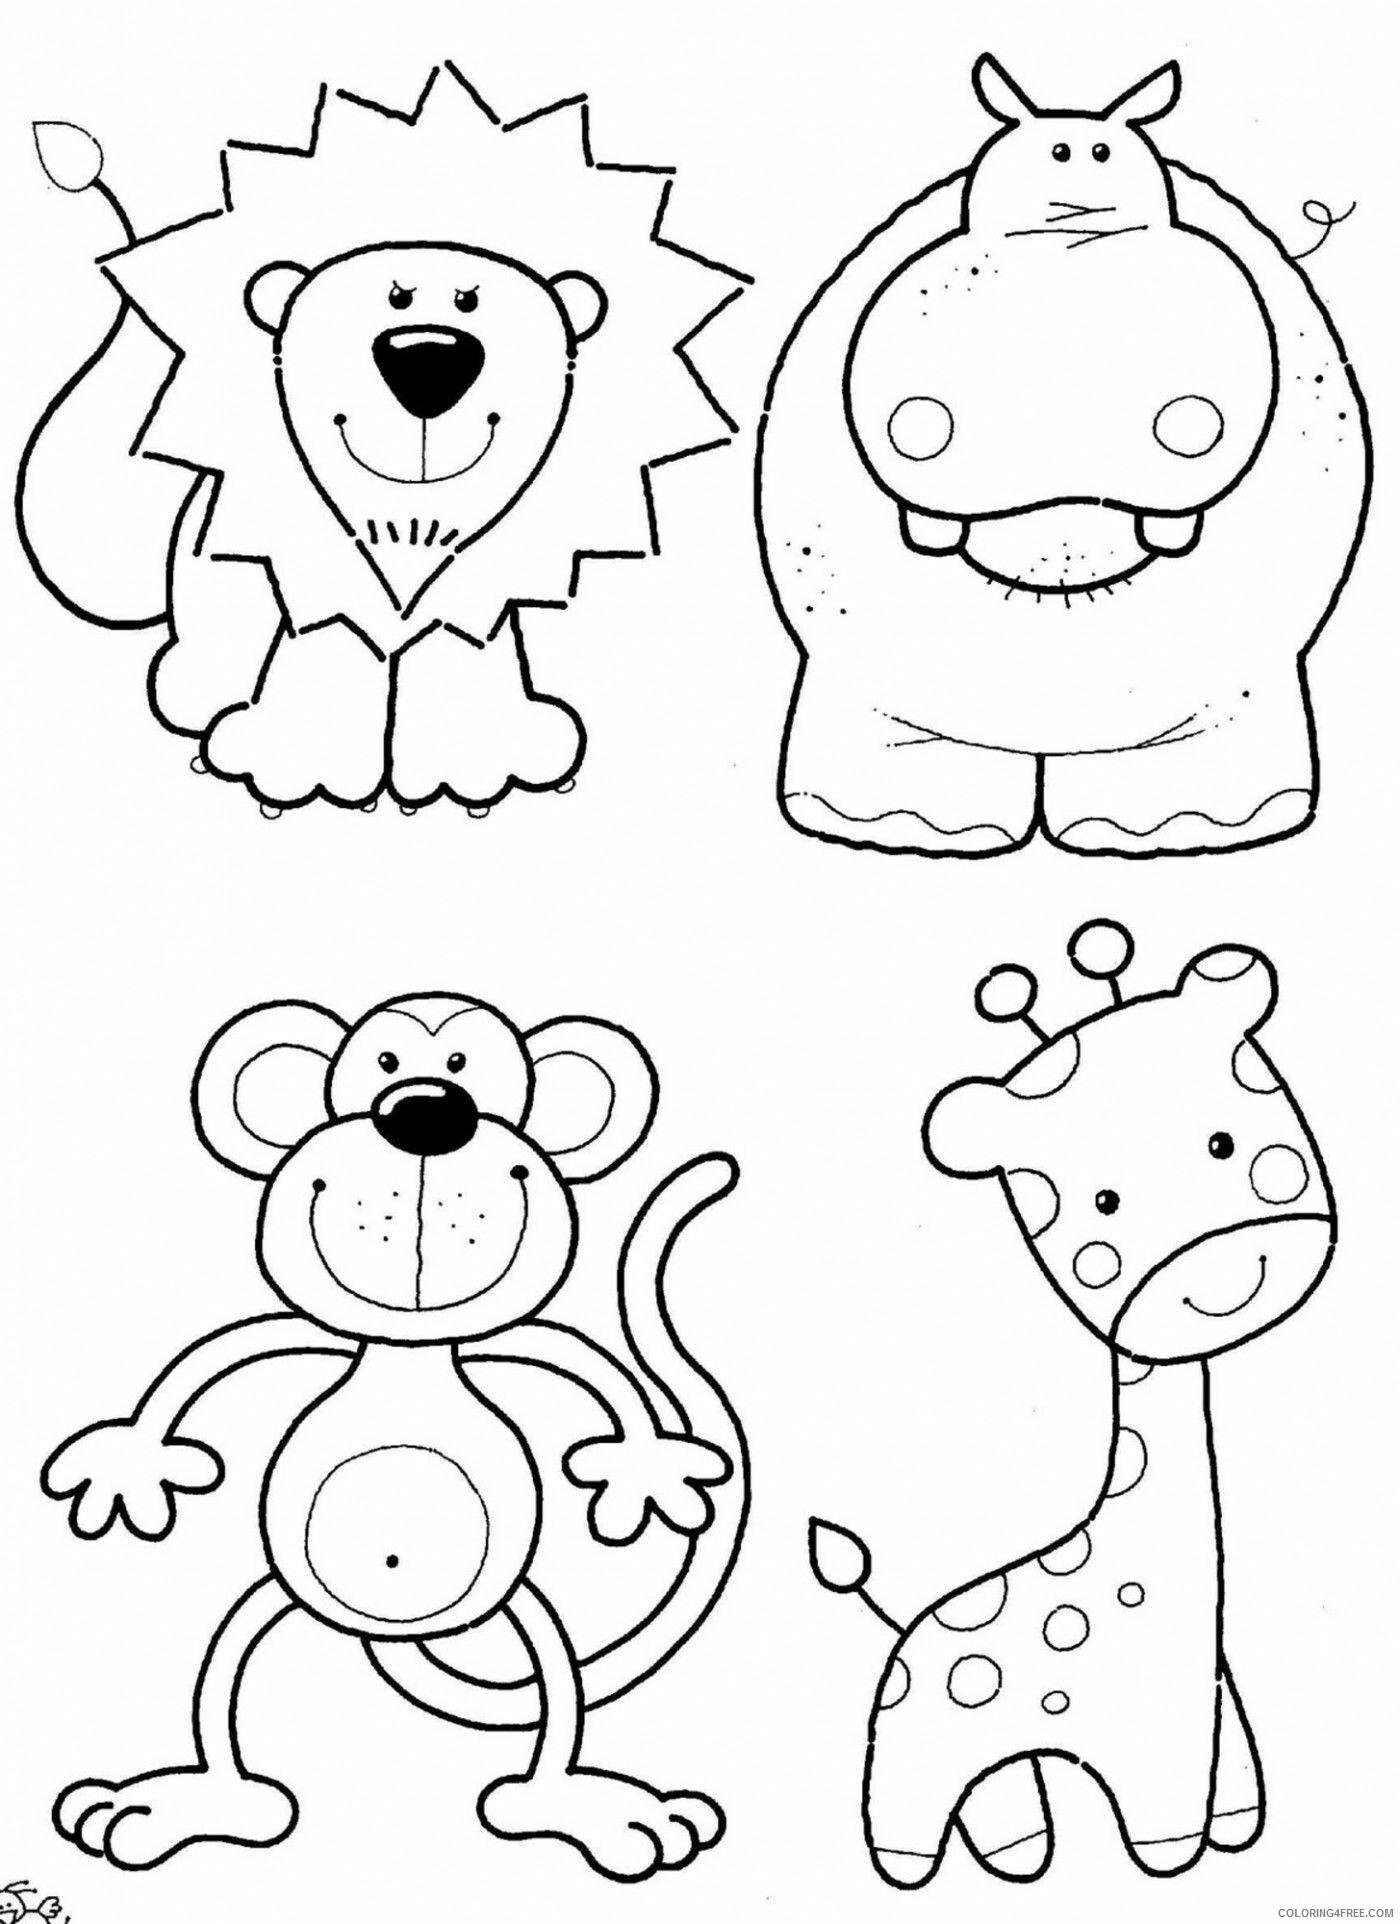 Animal Coloring Pages for Toddlers Printable Sheets animal for preschoolers 2021 a 0370 Coloring4free